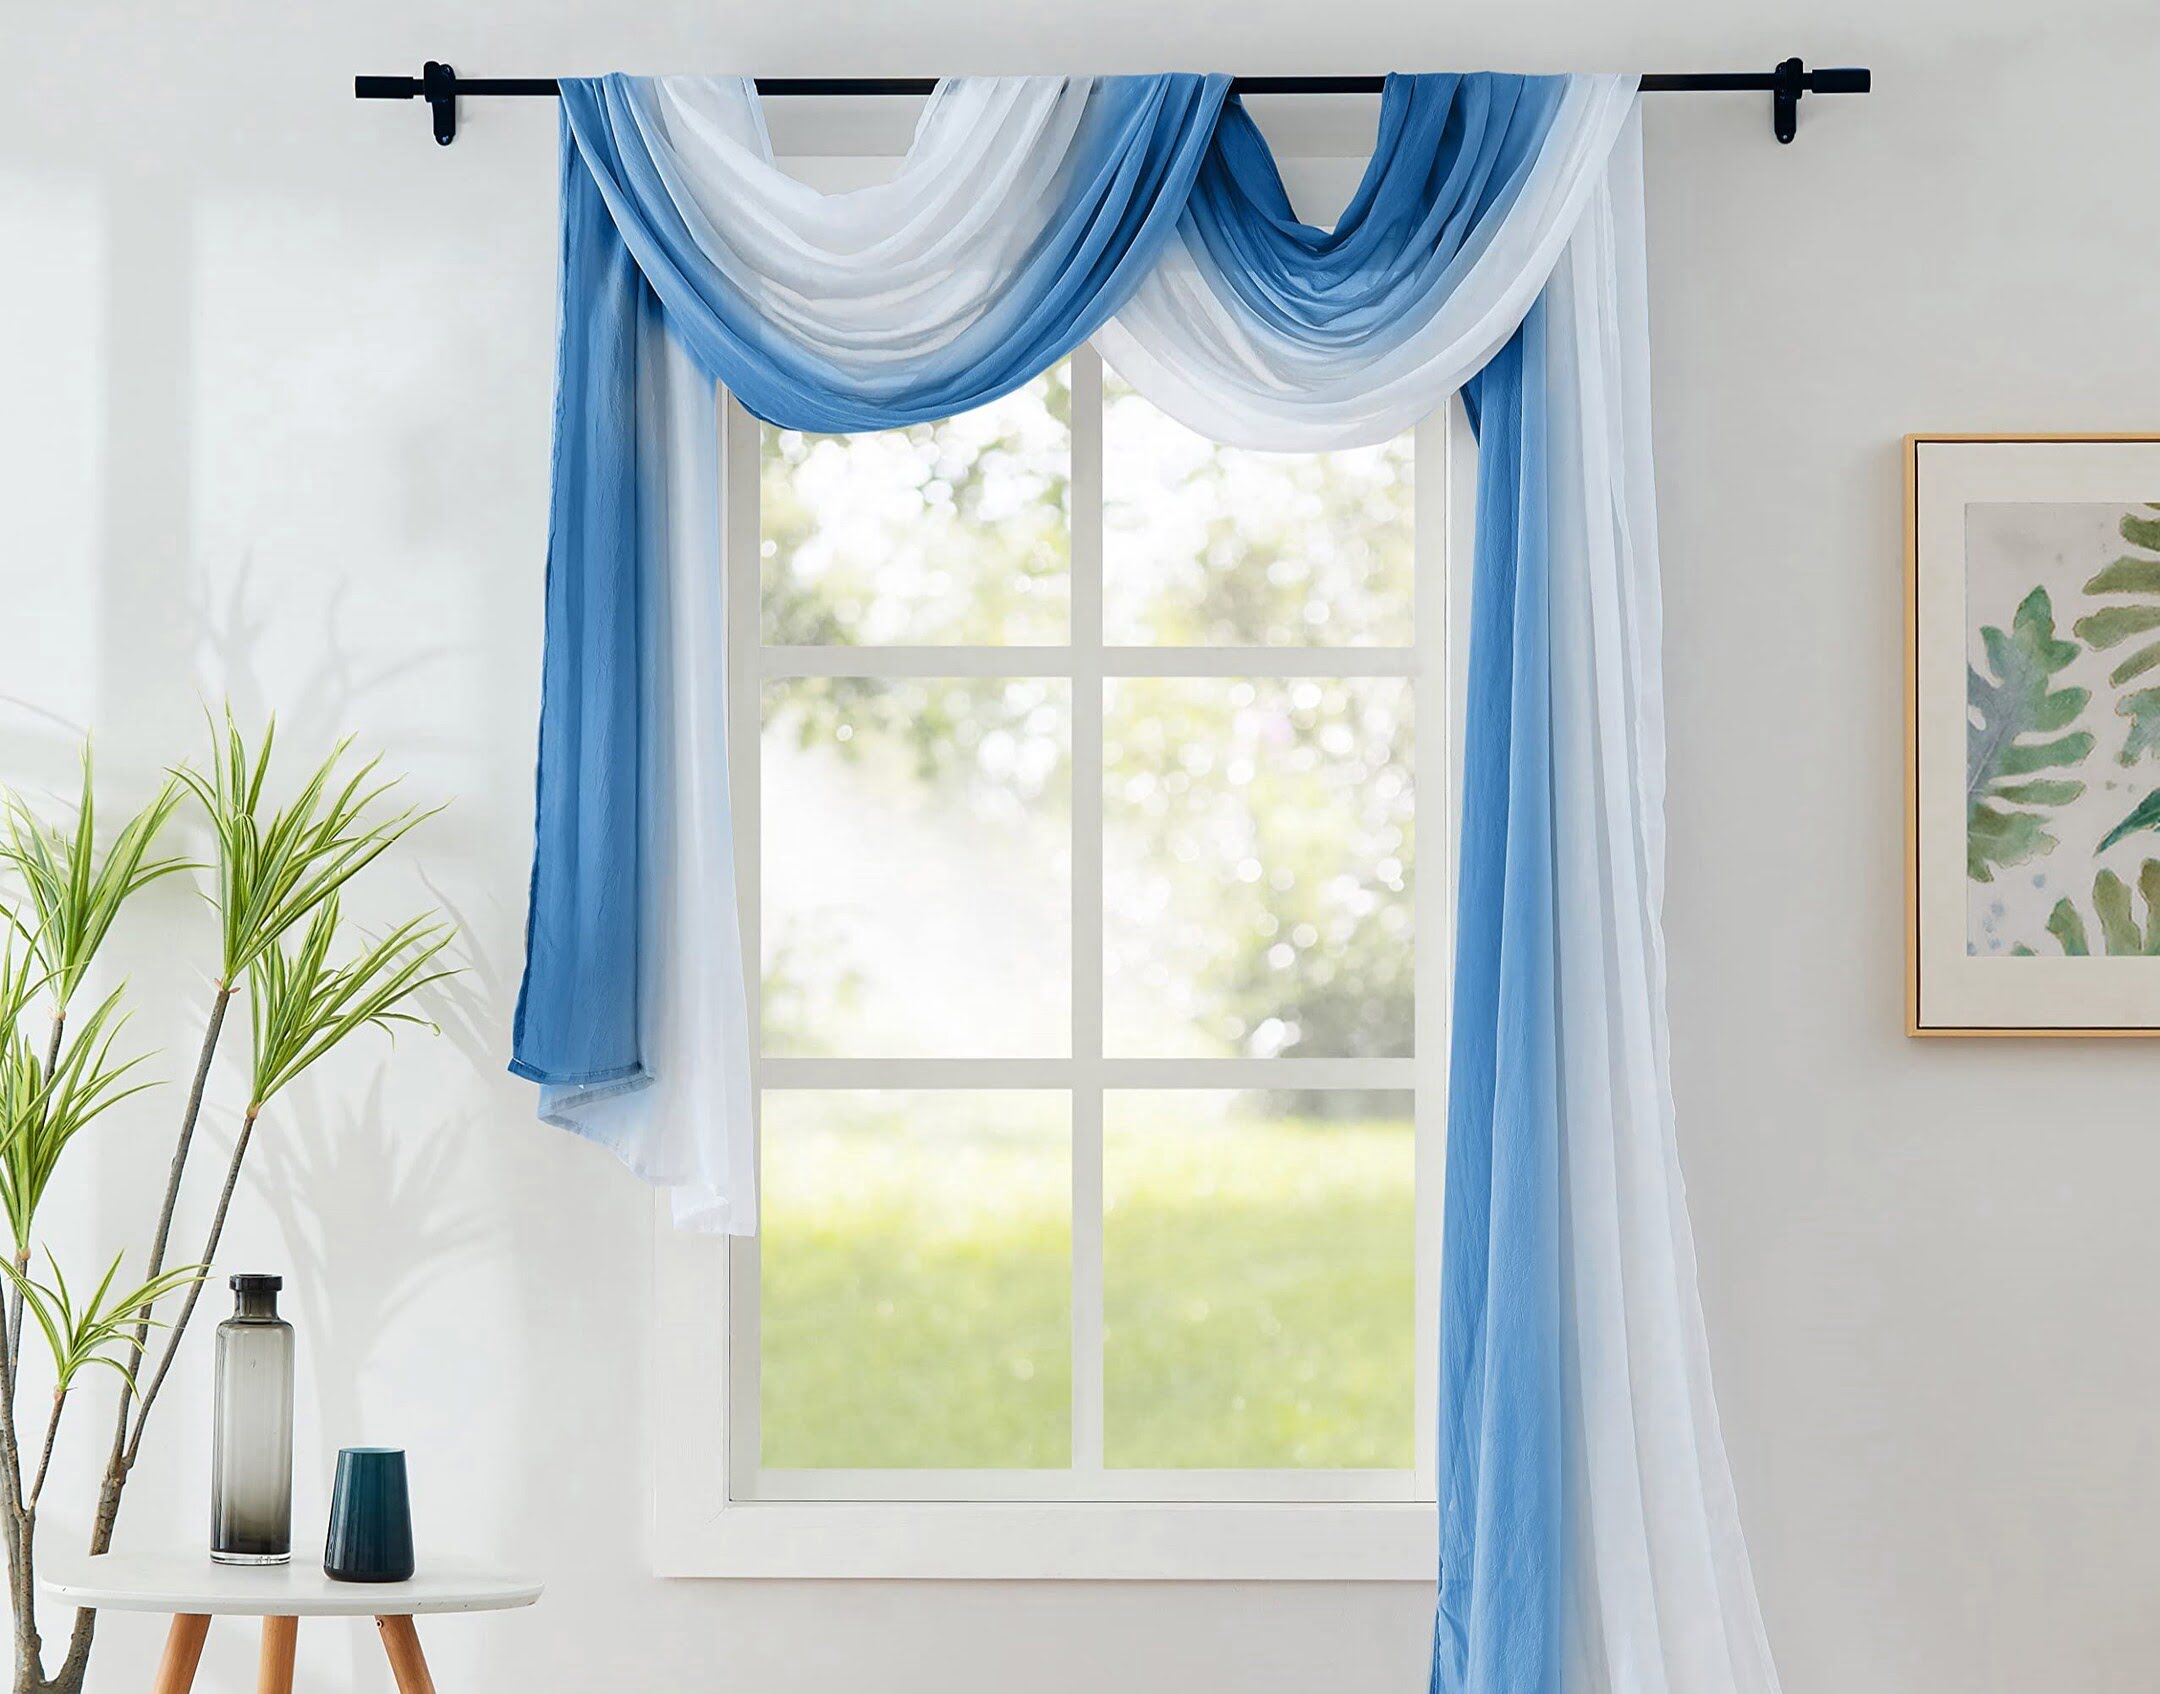 How To Hang Scarf Curtains